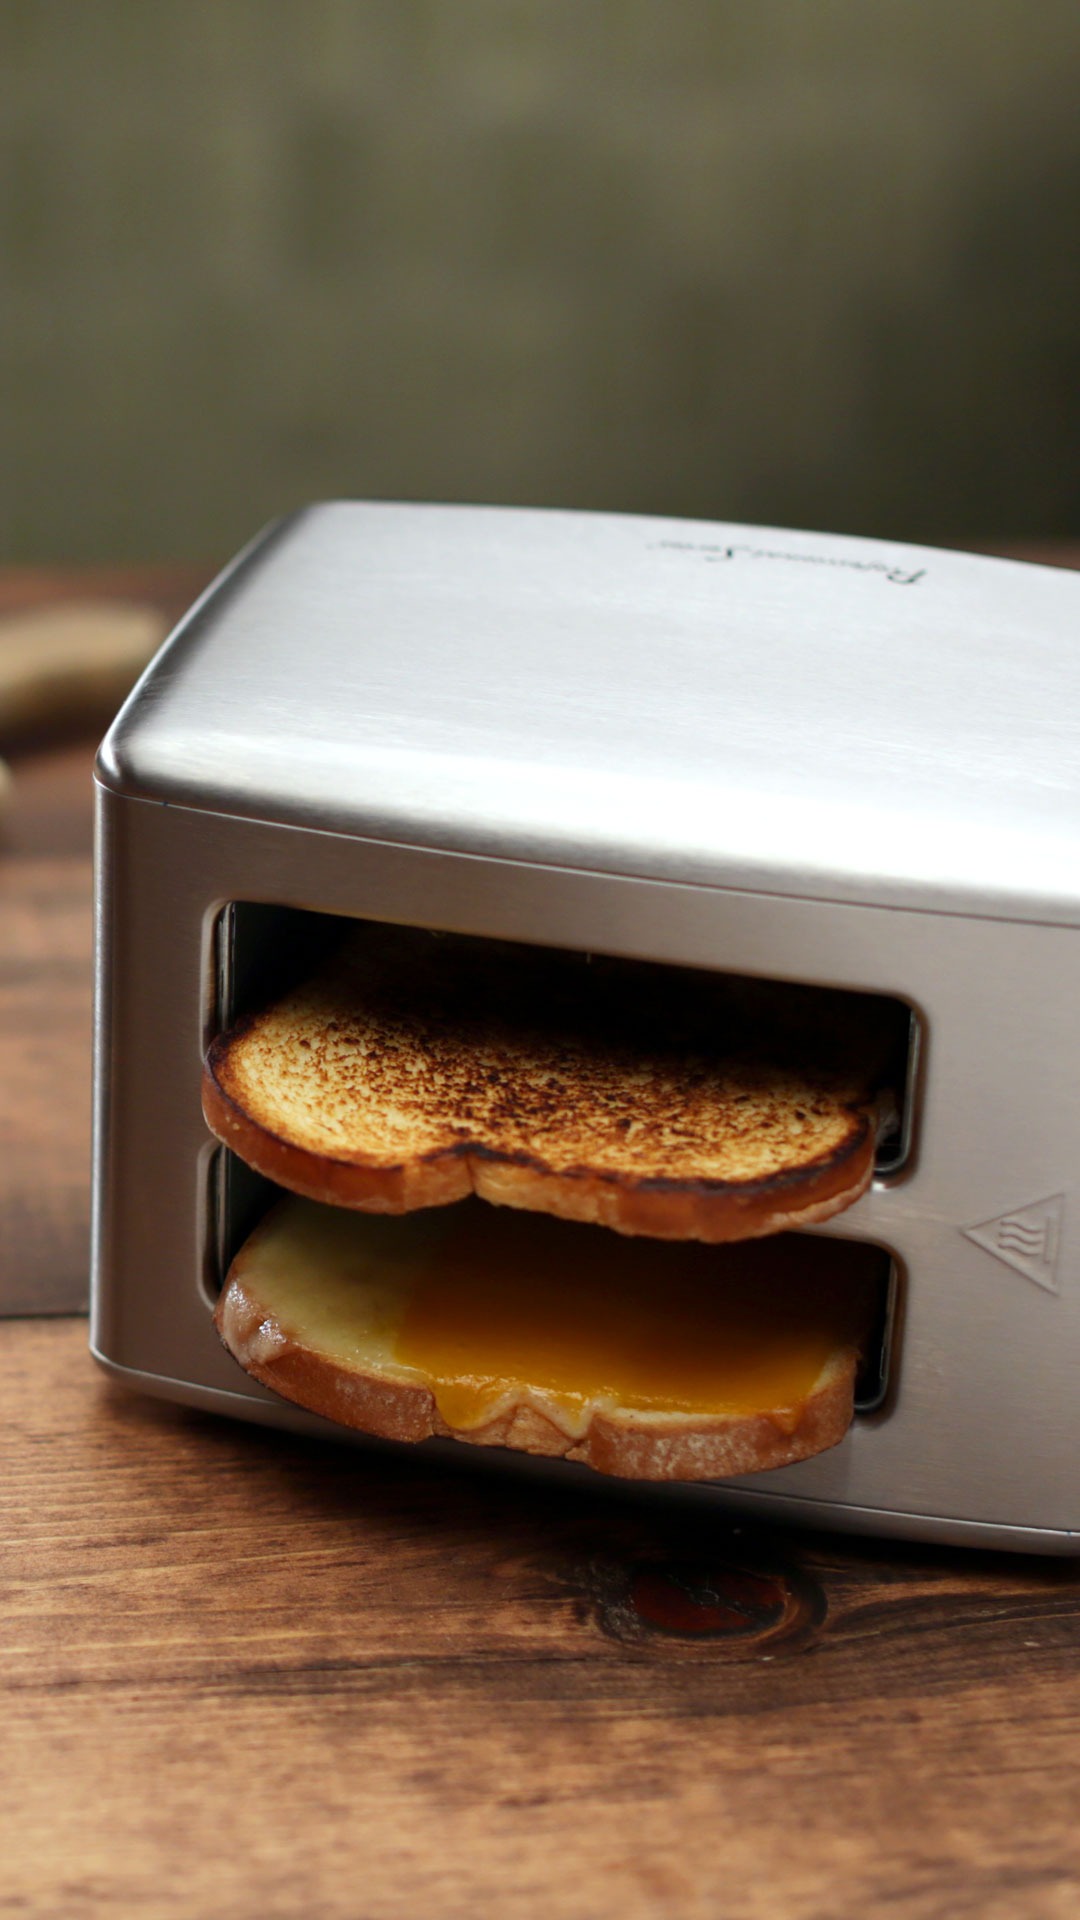 How to Make Toaster Grilled Cheese